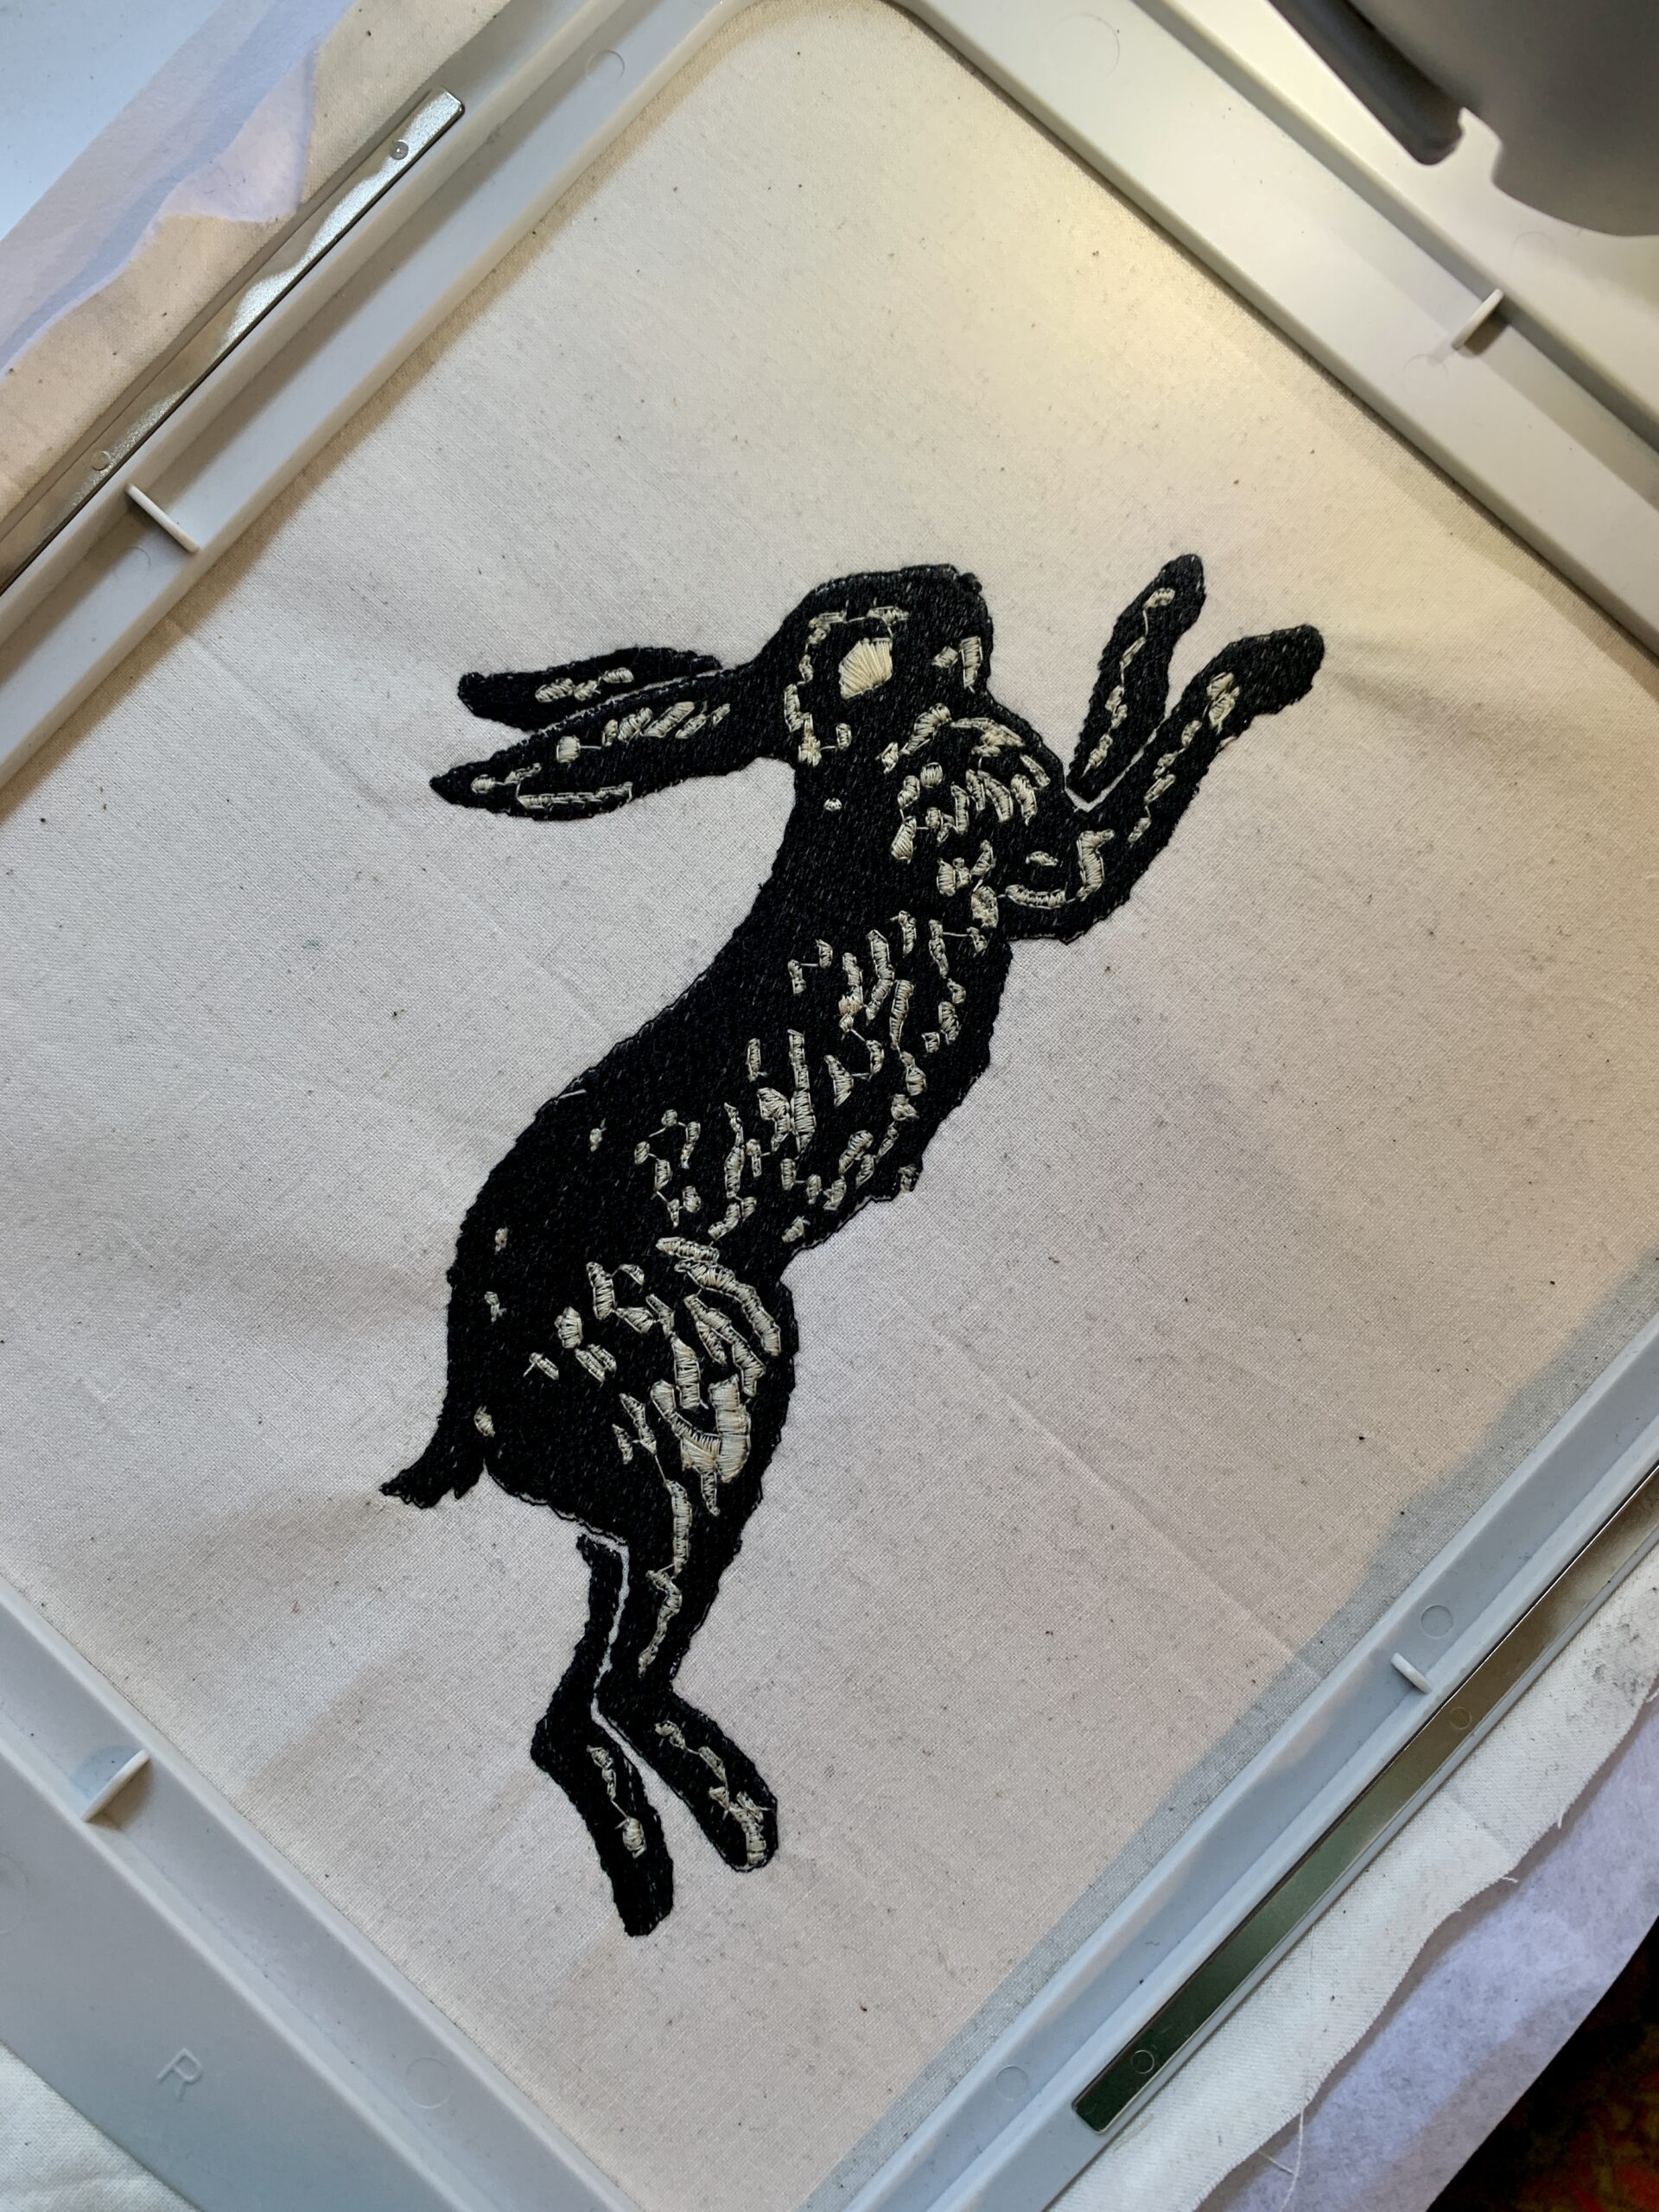 completed embroidery 2